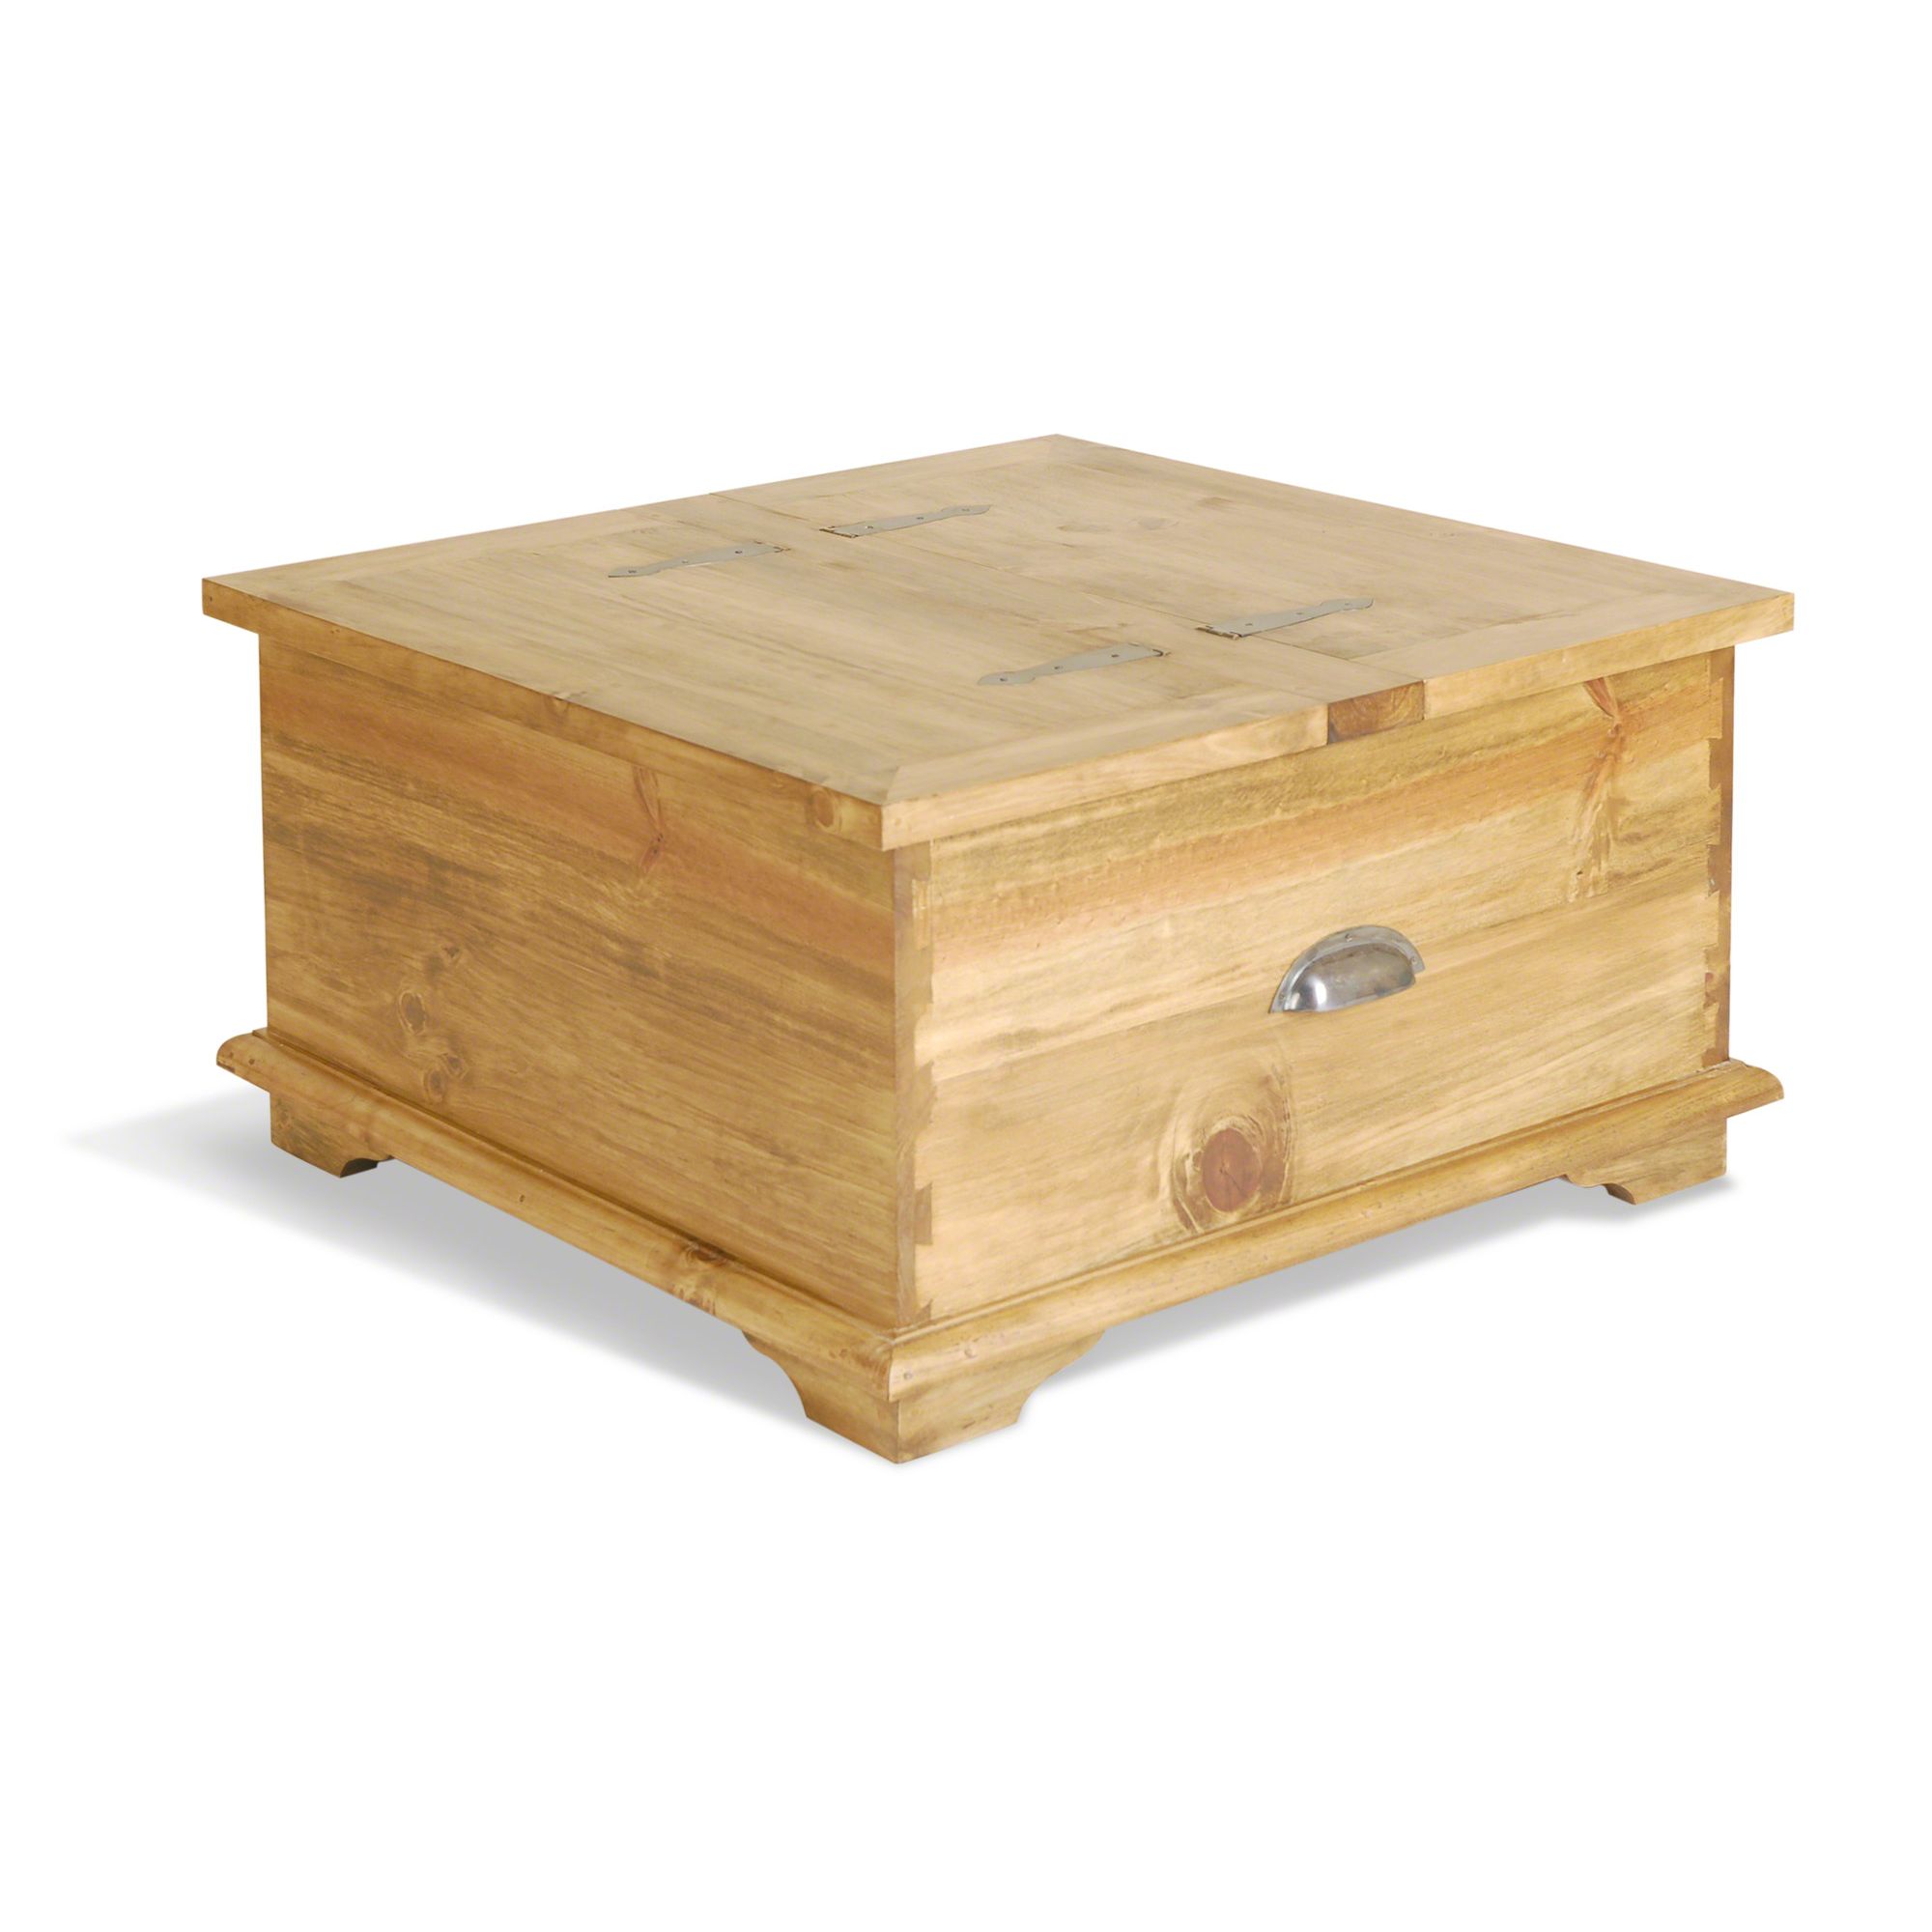 Oceans Apart Vintage Pine Square Trunk Coffee Table at Tescos Direct